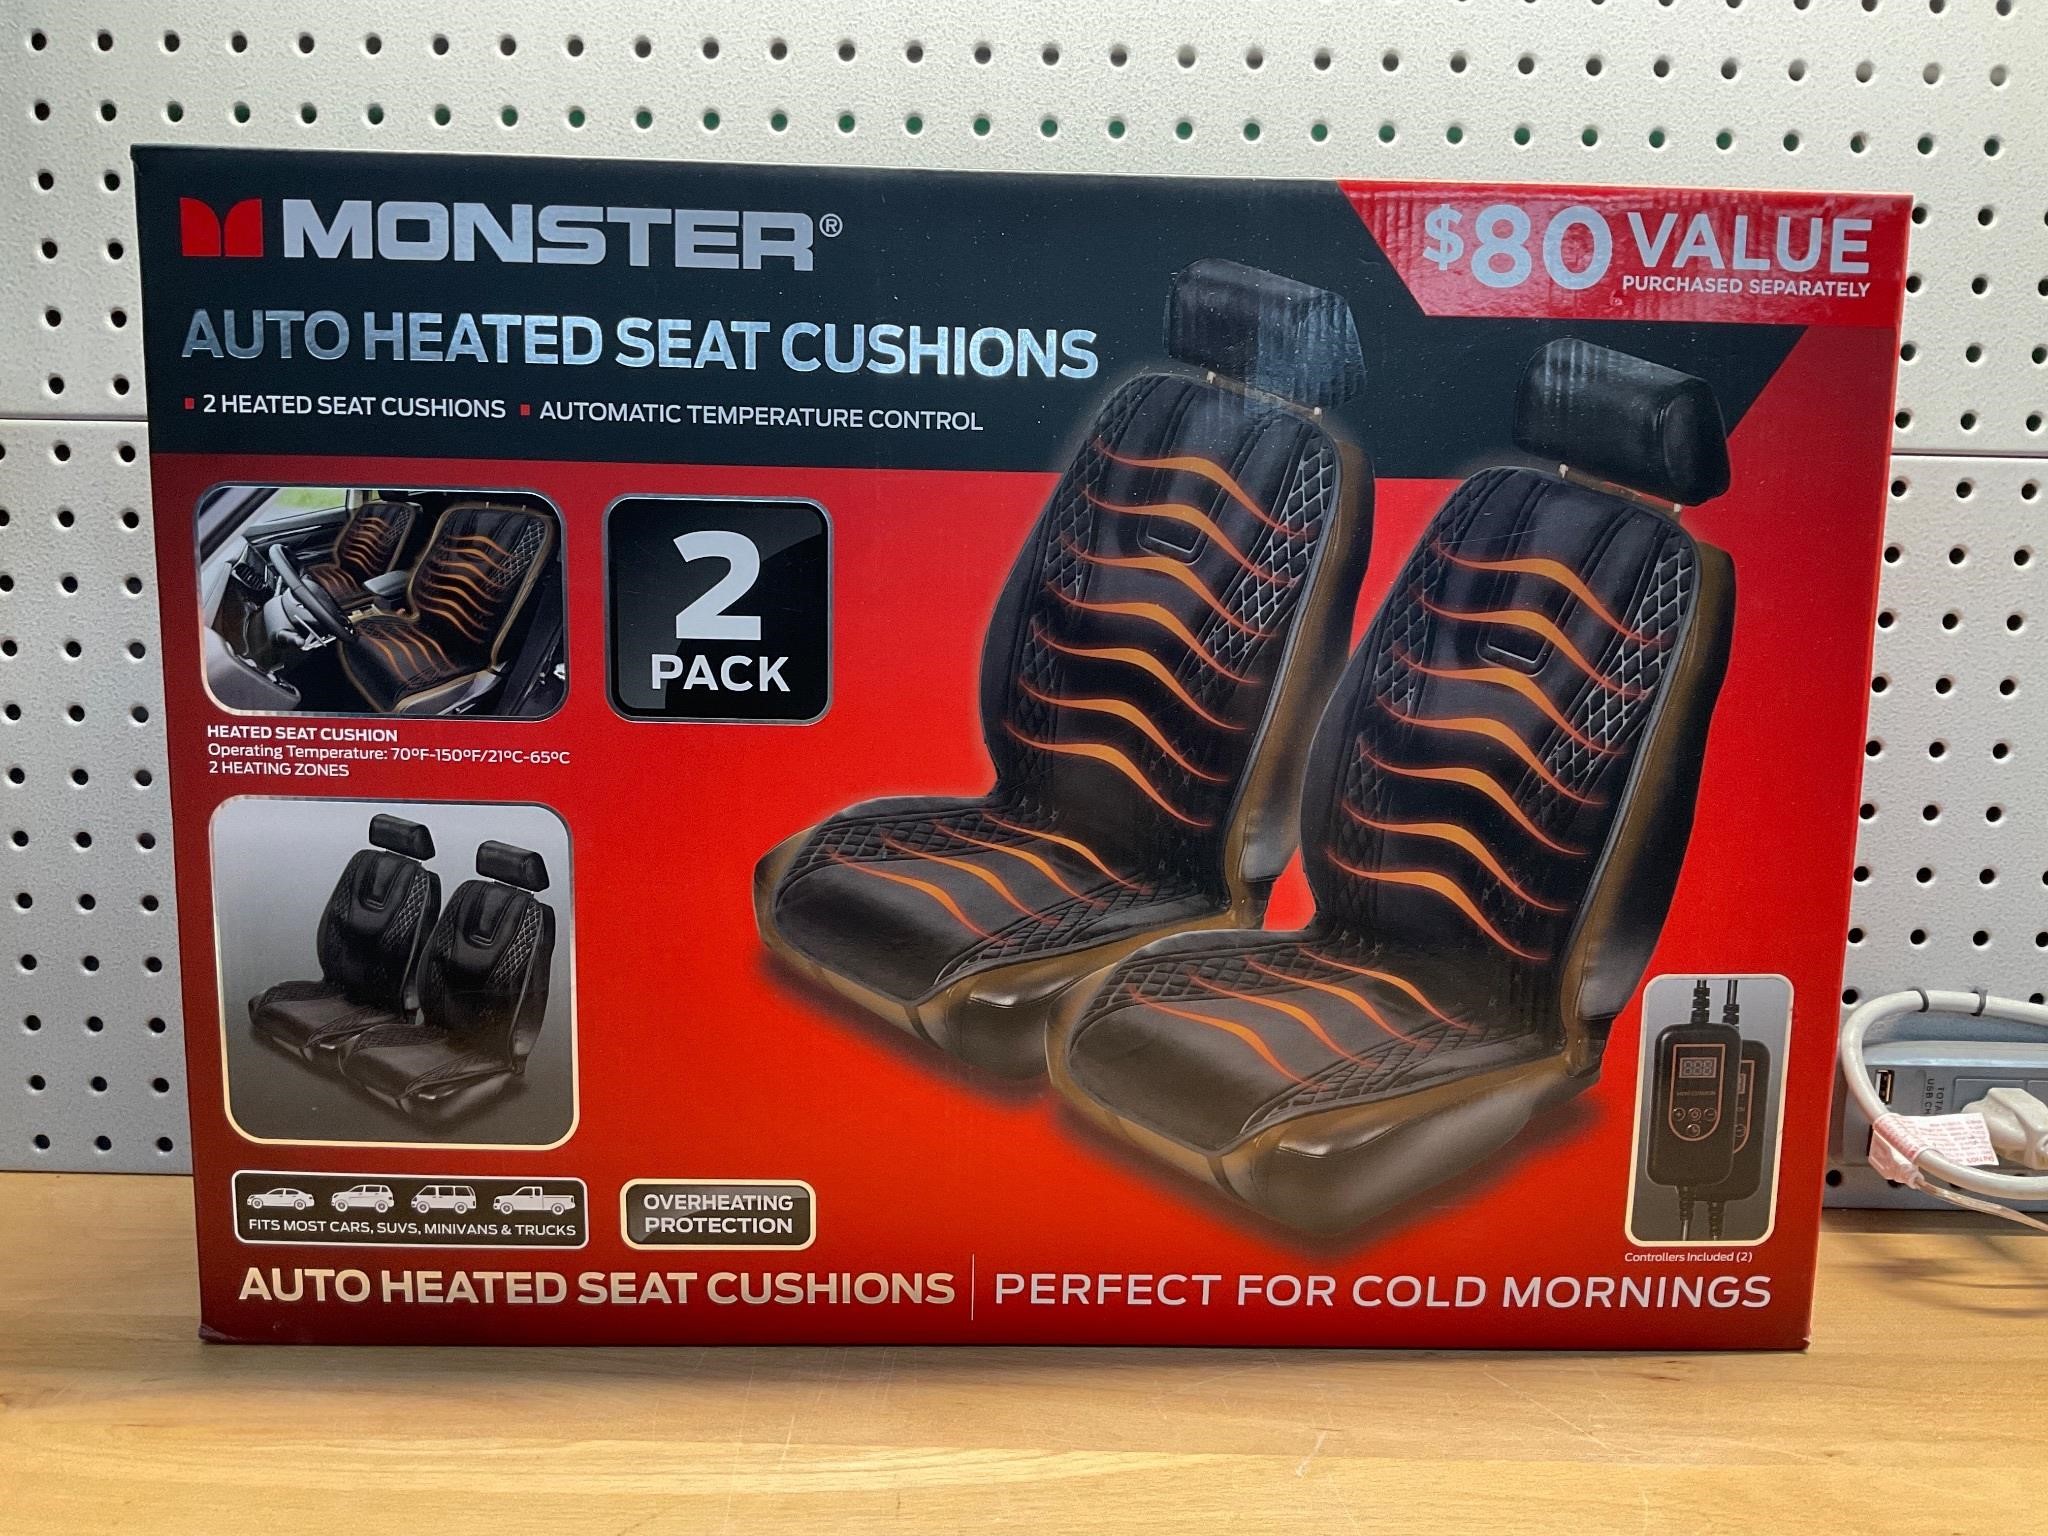 Monster auto heated seat cushions 2 pack